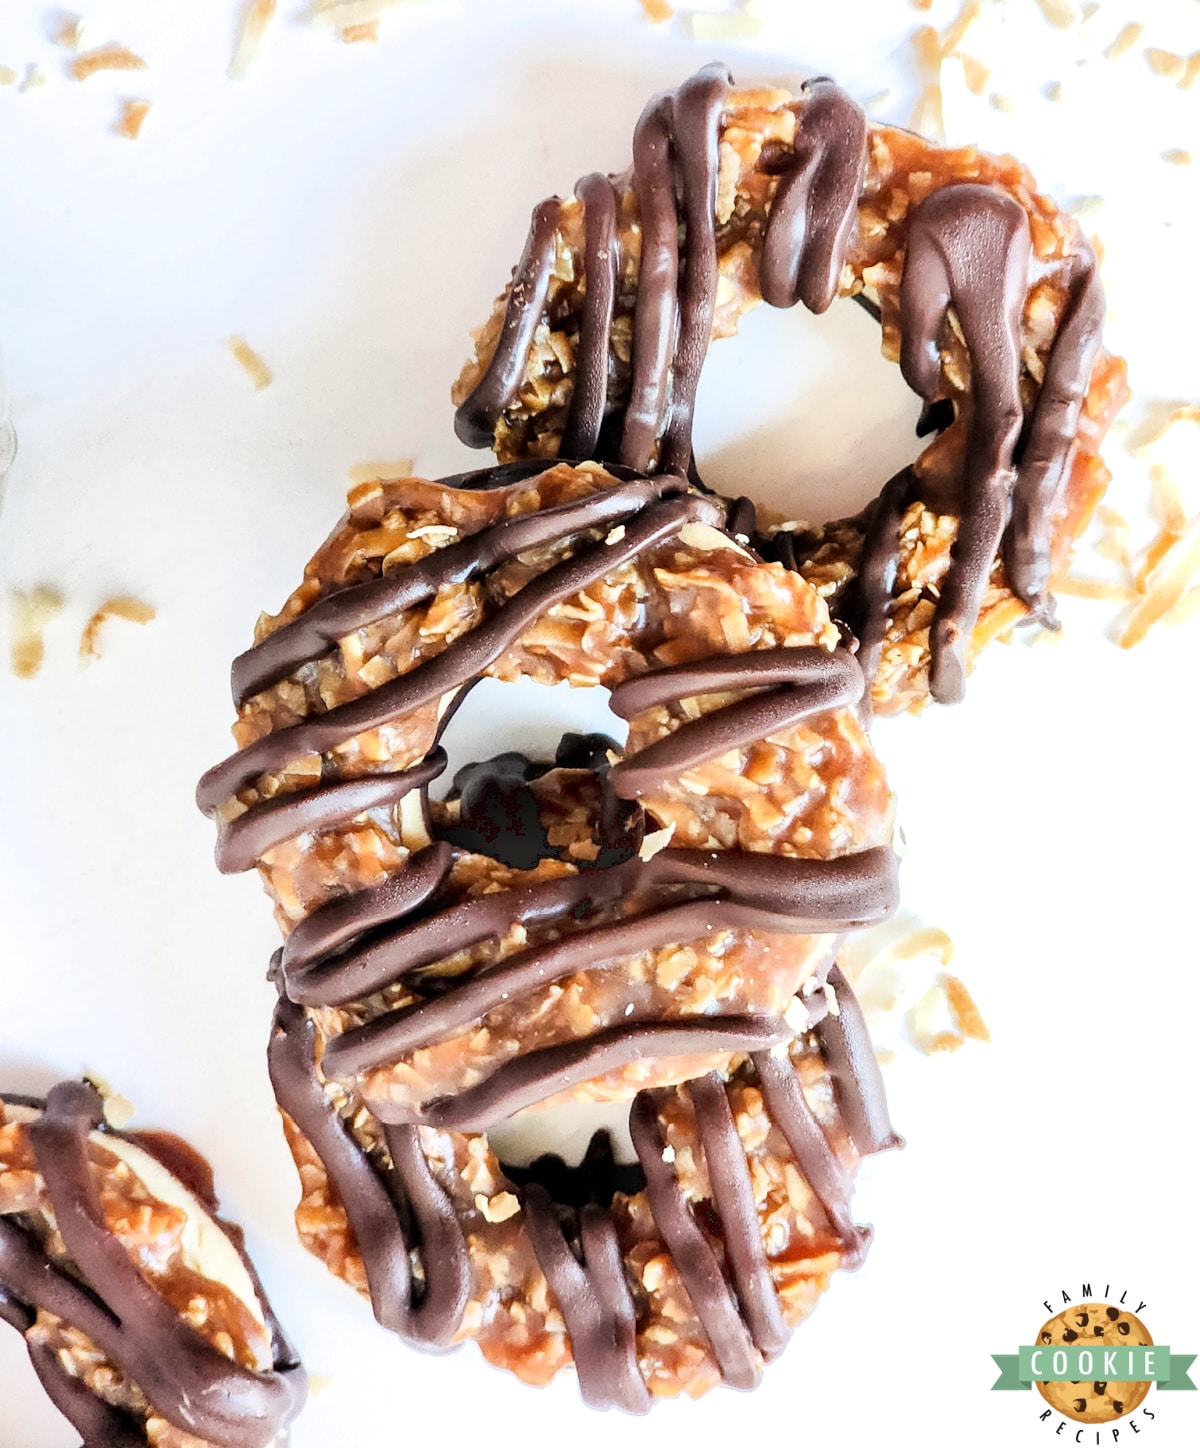 Copycat Samoa Cookies taste just like the Girl Scout cookie version! Delicious cookies made with chocolate, caramel and coconut. 